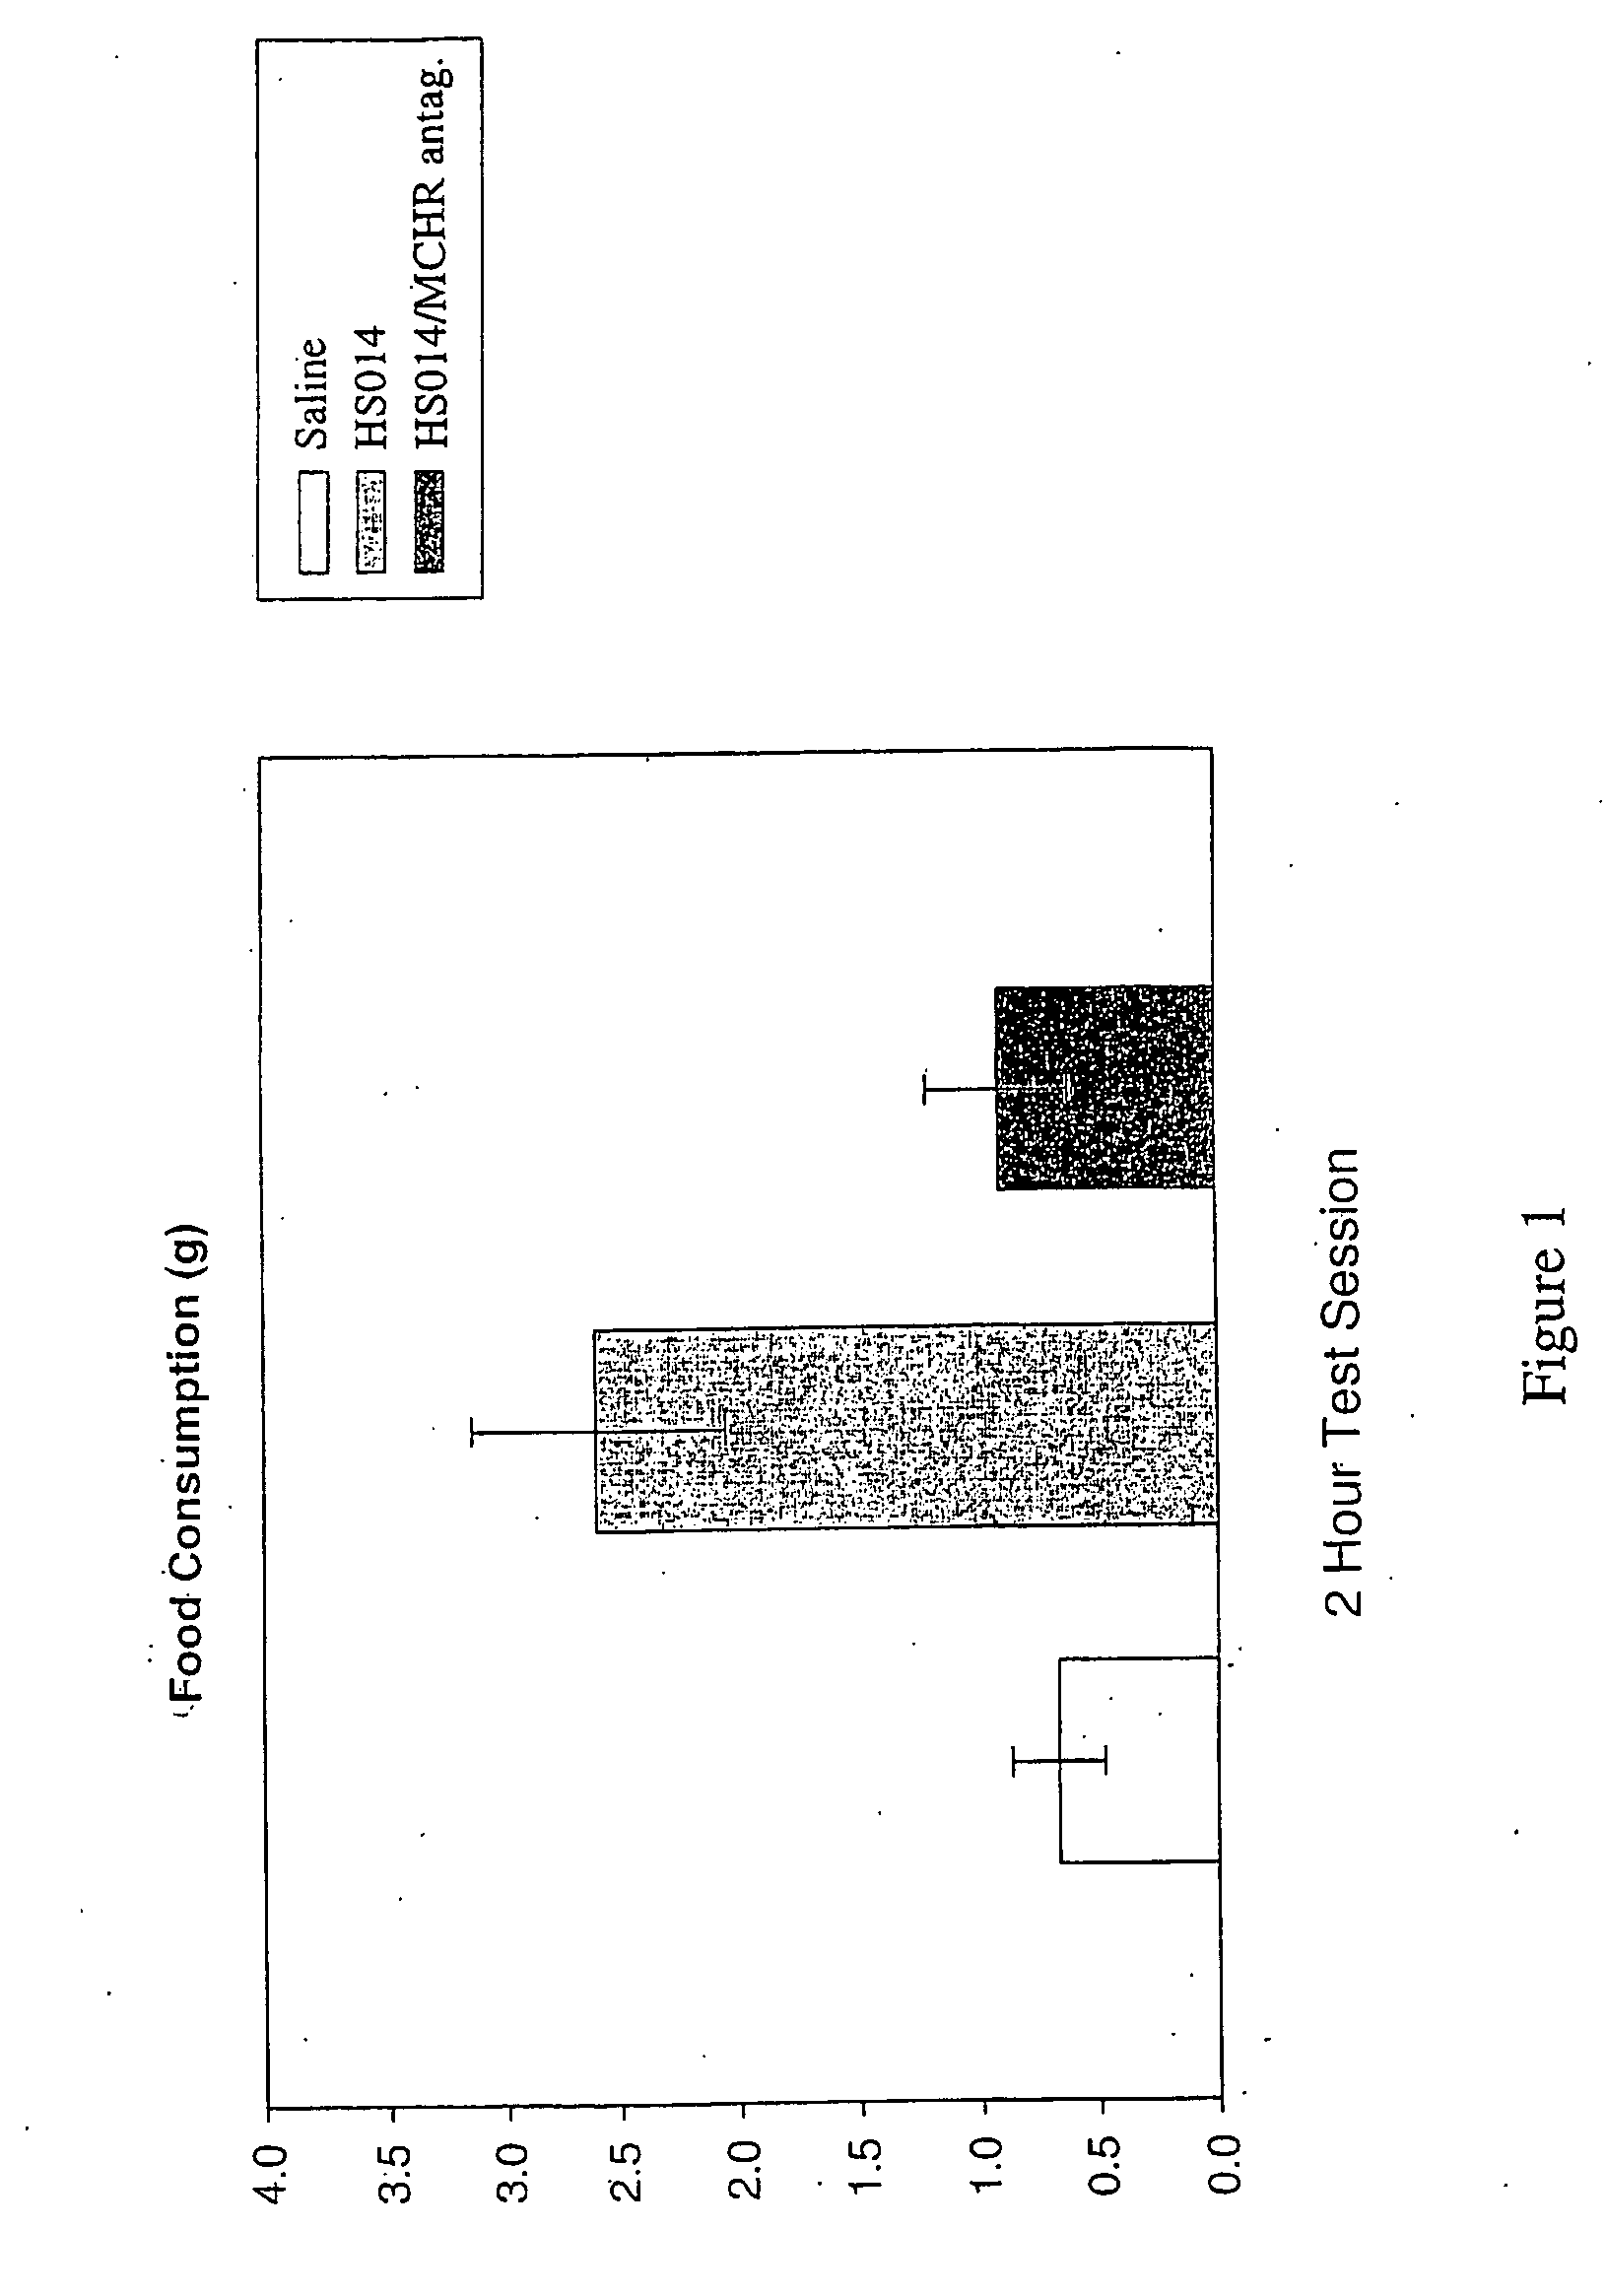 Methods for preventing and treating obesity in patients with mc4 receptor mutations